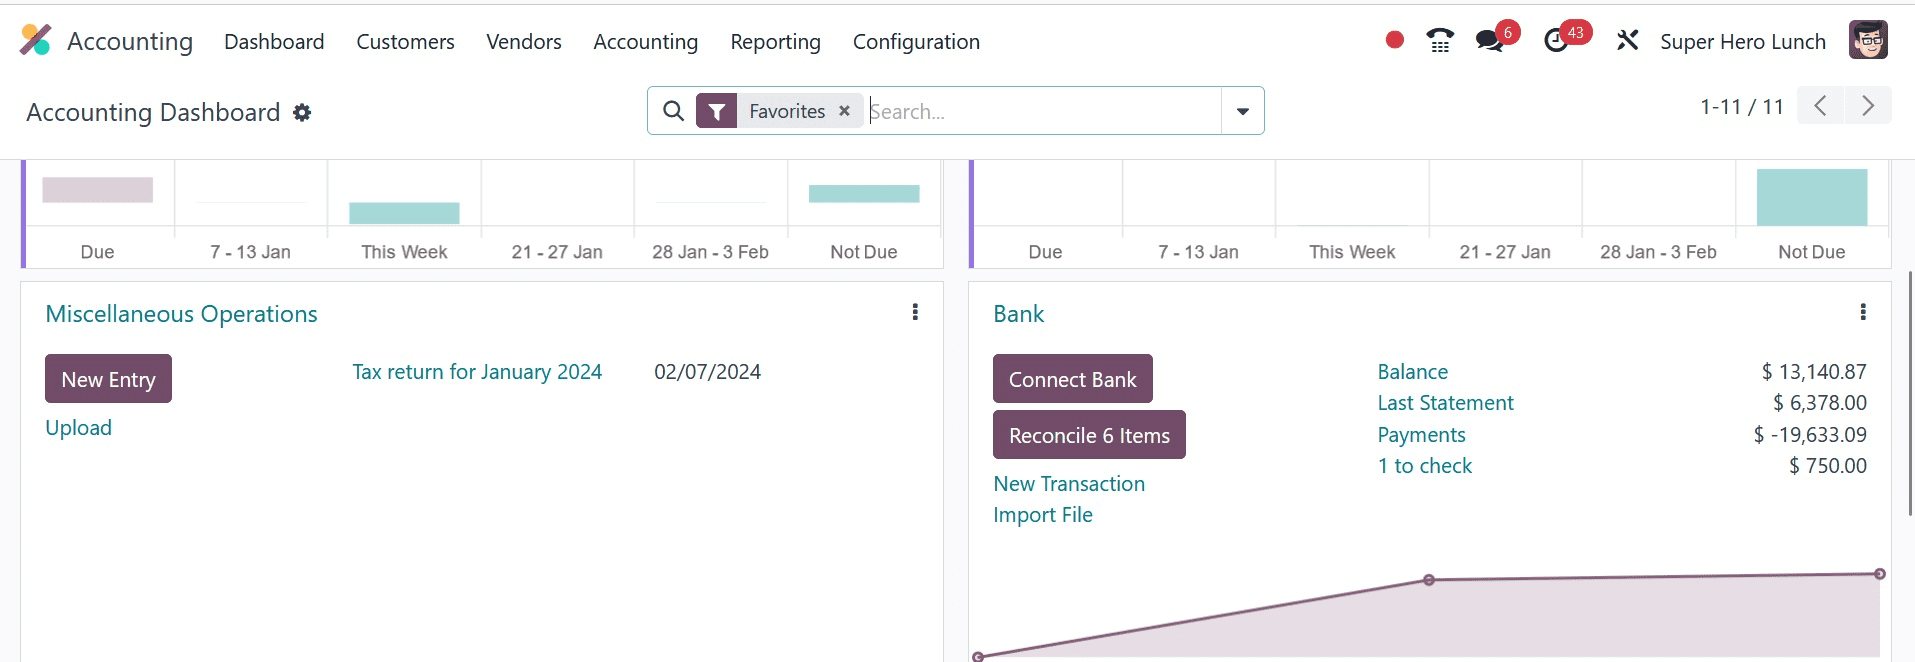 how-to-manage-ledger-posting-in-odoo-17-continental-accounting-10-cybrosys